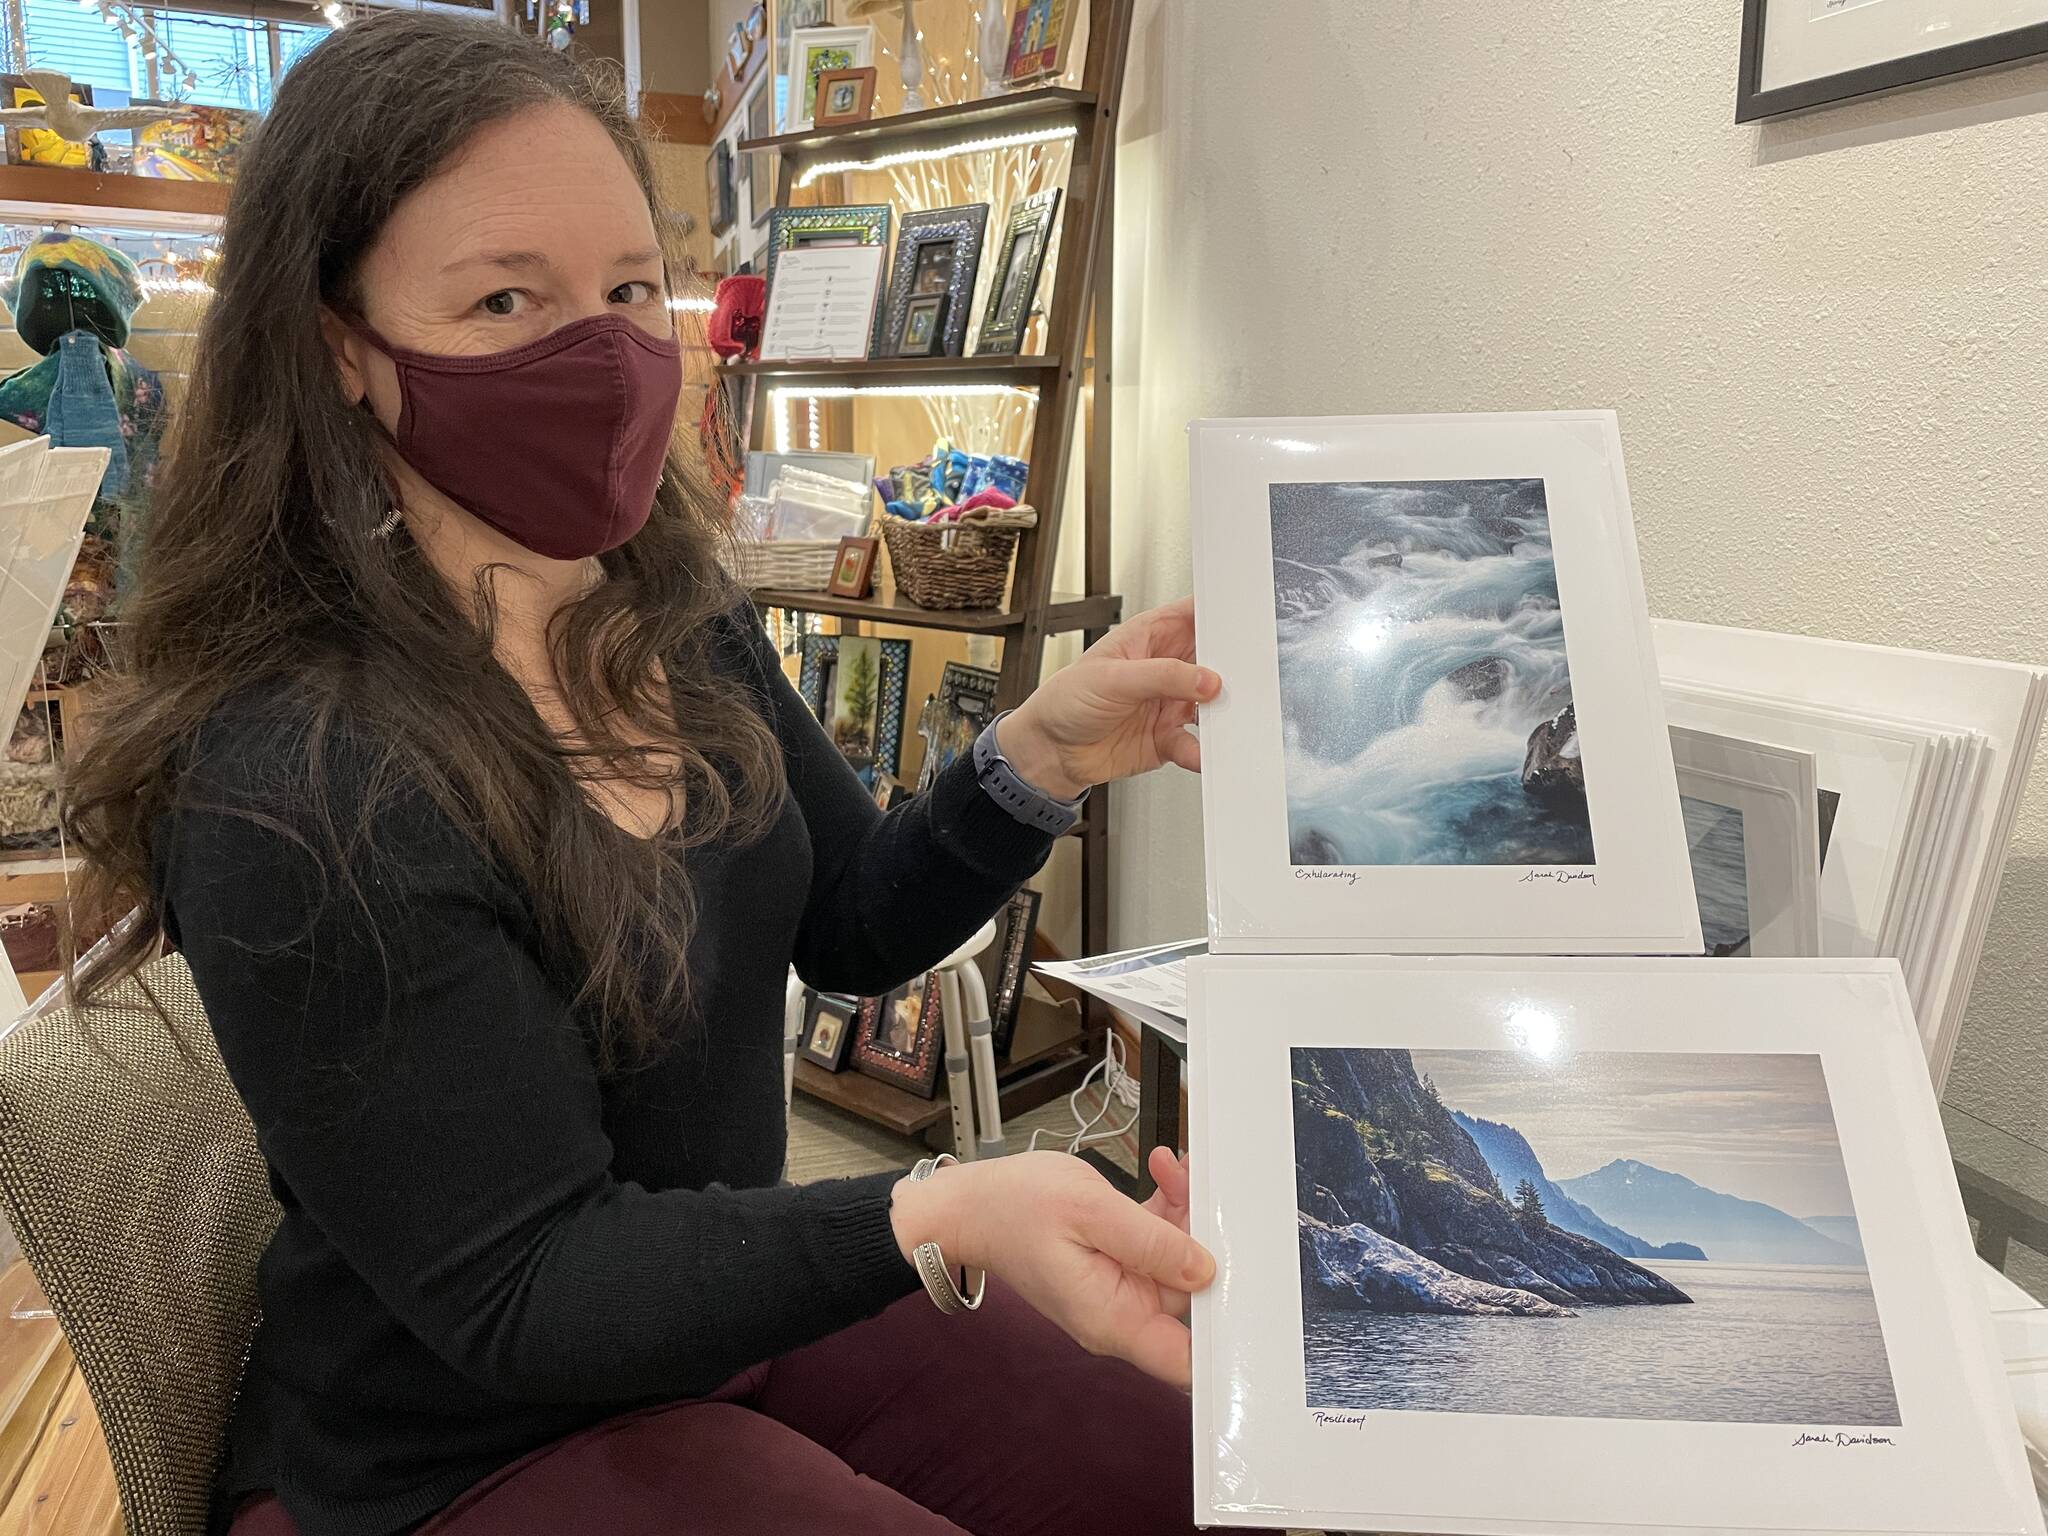 Michael S. Lockett / Capital City Weekly
Sarah Davidson, one of Annie Kaill’s featured artists for the March First Friday event, holds shots from her photography series “Moving Waters,” shot across Southeast Alaska using long-exposure photography.